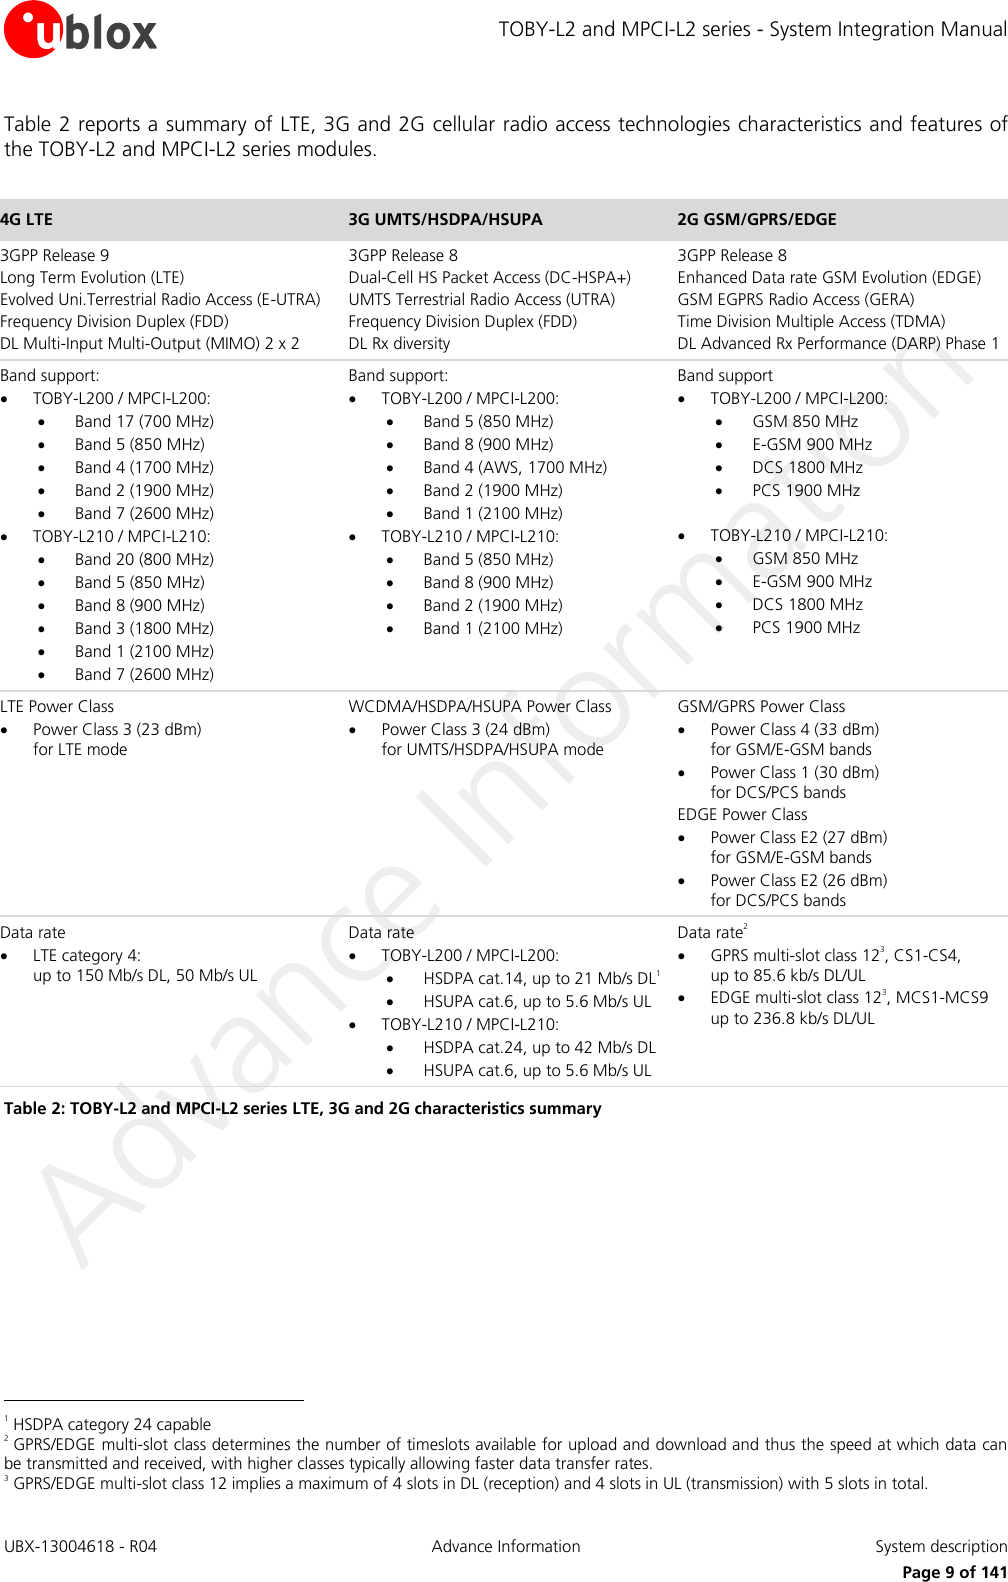 TOBY-L2 and MPCI-L2 series - System Integration Manual UBX-13004618 - R04  Advance Information  System description     Page 9 of 141 Table 2 reports a summary of LTE, 3G and 2G cellular radio access technologies characteristics and features of the TOBY-L2 and MPCI-L2 series modules.  4G LTE 3G UMTS/HSDPA/HSUPA 2G GSM/GPRS/EDGE 3GPP Release 9 Long Term Evolution (LTE) Evolved Uni.Terrestrial Radio Access (E-UTRA) Frequency Division Duplex (FDD) DL Multi-Input Multi-Output (MIMO) 2 x 2  3GPP Release 8 Dual-Cell HS Packet Access (DC-HSPA+) UMTS Terrestrial Radio Access (UTRA) Frequency Division Duplex (FDD) DL Rx diversity  3GPP Release 8 Enhanced Data rate GSM Evolution (EDGE) GSM EGPRS Radio Access (GERA) Time Division Multiple Access (TDMA) DL Advanced Rx Performance (DARP) Phase 1 Band support:  TOBY-L200 / MPCI-L200:  Band 17 (700 MHz)  Band 5 (850 MHz)  Band 4 (1700 MHz)  Band 2 (1900 MHz)  Band 7 (2600 MHz)  TOBY-L210 / MPCI-L210:  Band 20 (800 MHz)  Band 5 (850 MHz)  Band 8 (900 MHz)  Band 3 (1800 MHz)  Band 1 (2100 MHz)  Band 7 (2600 MHz) Band support:  TOBY-L200 / MPCI-L200:  Band 5 (850 MHz)  Band 8 (900 MHz)  Band 4 (AWS, 1700 MHz)  Band 2 (1900 MHz)  Band 1 (2100 MHz)  TOBY-L210 / MPCI-L210:  Band 5 (850 MHz)  Band 8 (900 MHz)  Band 2 (1900 MHz)  Band 1 (2100 MHz) Band support  TOBY-L200 / MPCI-L200:  GSM 850 MHz  E-GSM 900 MHz  DCS 1800 MHz  PCS 1900 MHz   TOBY-L210 / MPCI-L210:  GSM 850 MHz  E-GSM 900 MHz  DCS 1800 MHz  PCS 1900 MHz LTE Power Class  Power Class 3 (23 dBm)  for LTE mode WCDMA/HSDPA/HSUPA Power Class  Power Class 3 (24 dBm)  for UMTS/HSDPA/HSUPA mode GSM/GPRS Power Class  Power Class 4 (33 dBm)  for GSM/E-GSM bands  Power Class 1 (30 dBm)  for DCS/PCS bands EDGE Power Class  Power Class E2 (27 dBm)  for GSM/E-GSM bands  Power Class E2 (26 dBm)  for DCS/PCS bands Data rate  LTE category 4:  up to 150 Mb/s DL, 50 Mb/s UL  Data rate  TOBY-L200 / MPCI-L200:  HSDPA cat.14, up to 21 Mb/s DL1  HSUPA cat.6, up to 5.6 Mb/s UL  TOBY-L210 / MPCI-L210:  HSDPA cat.24, up to 42 Mb/s DL  HSUPA cat.6, up to 5.6 Mb/s UL Data rate2  GPRS multi-slot class 123, CS1-CS4,  up to 85.6 kb/s DL/UL   EDGE multi-slot class 123, MCS1-MCS9  up to 236.8 kb/s DL/UL  Table 2: TOBY-L2 and MPCI-L2 series LTE, 3G and 2G characteristics summary                                                        1 HSDPA category 24 capable 2 GPRS/EDGE multi-slot class determines the number of timeslots available for upload and download and thus the speed at which data can be transmitted and received, with higher classes typically allowing faster data transfer rates. 3 GPRS/EDGE multi-slot class 12 implies a maximum of 4 slots in DL (reception) and 4 slots in UL (transmission) with 5 slots in total. 